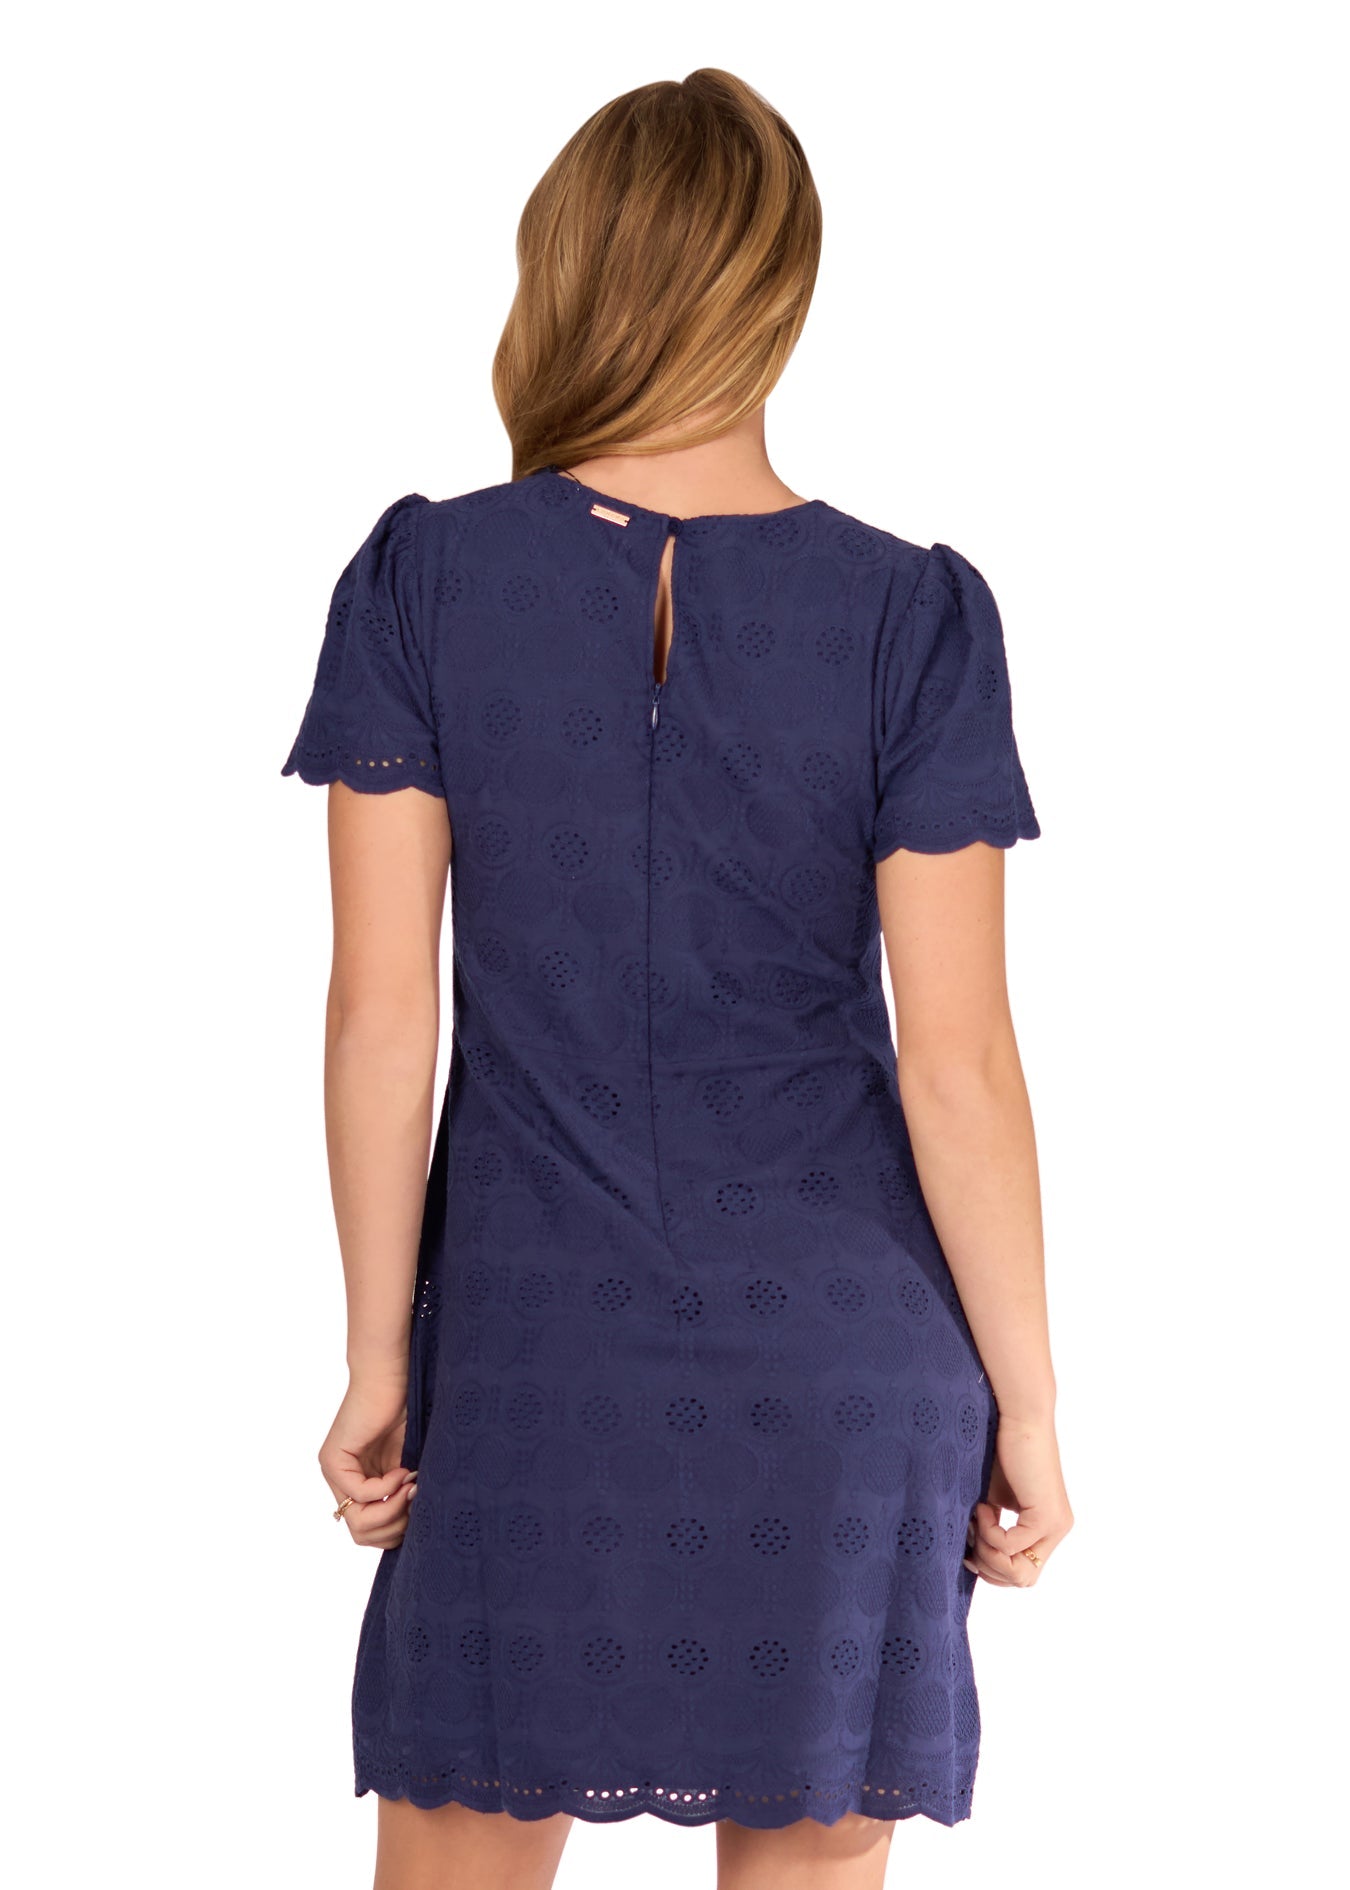 The back of a blonde woman wearing the Navy Eyelet Short Sleeve Dress on a white background.